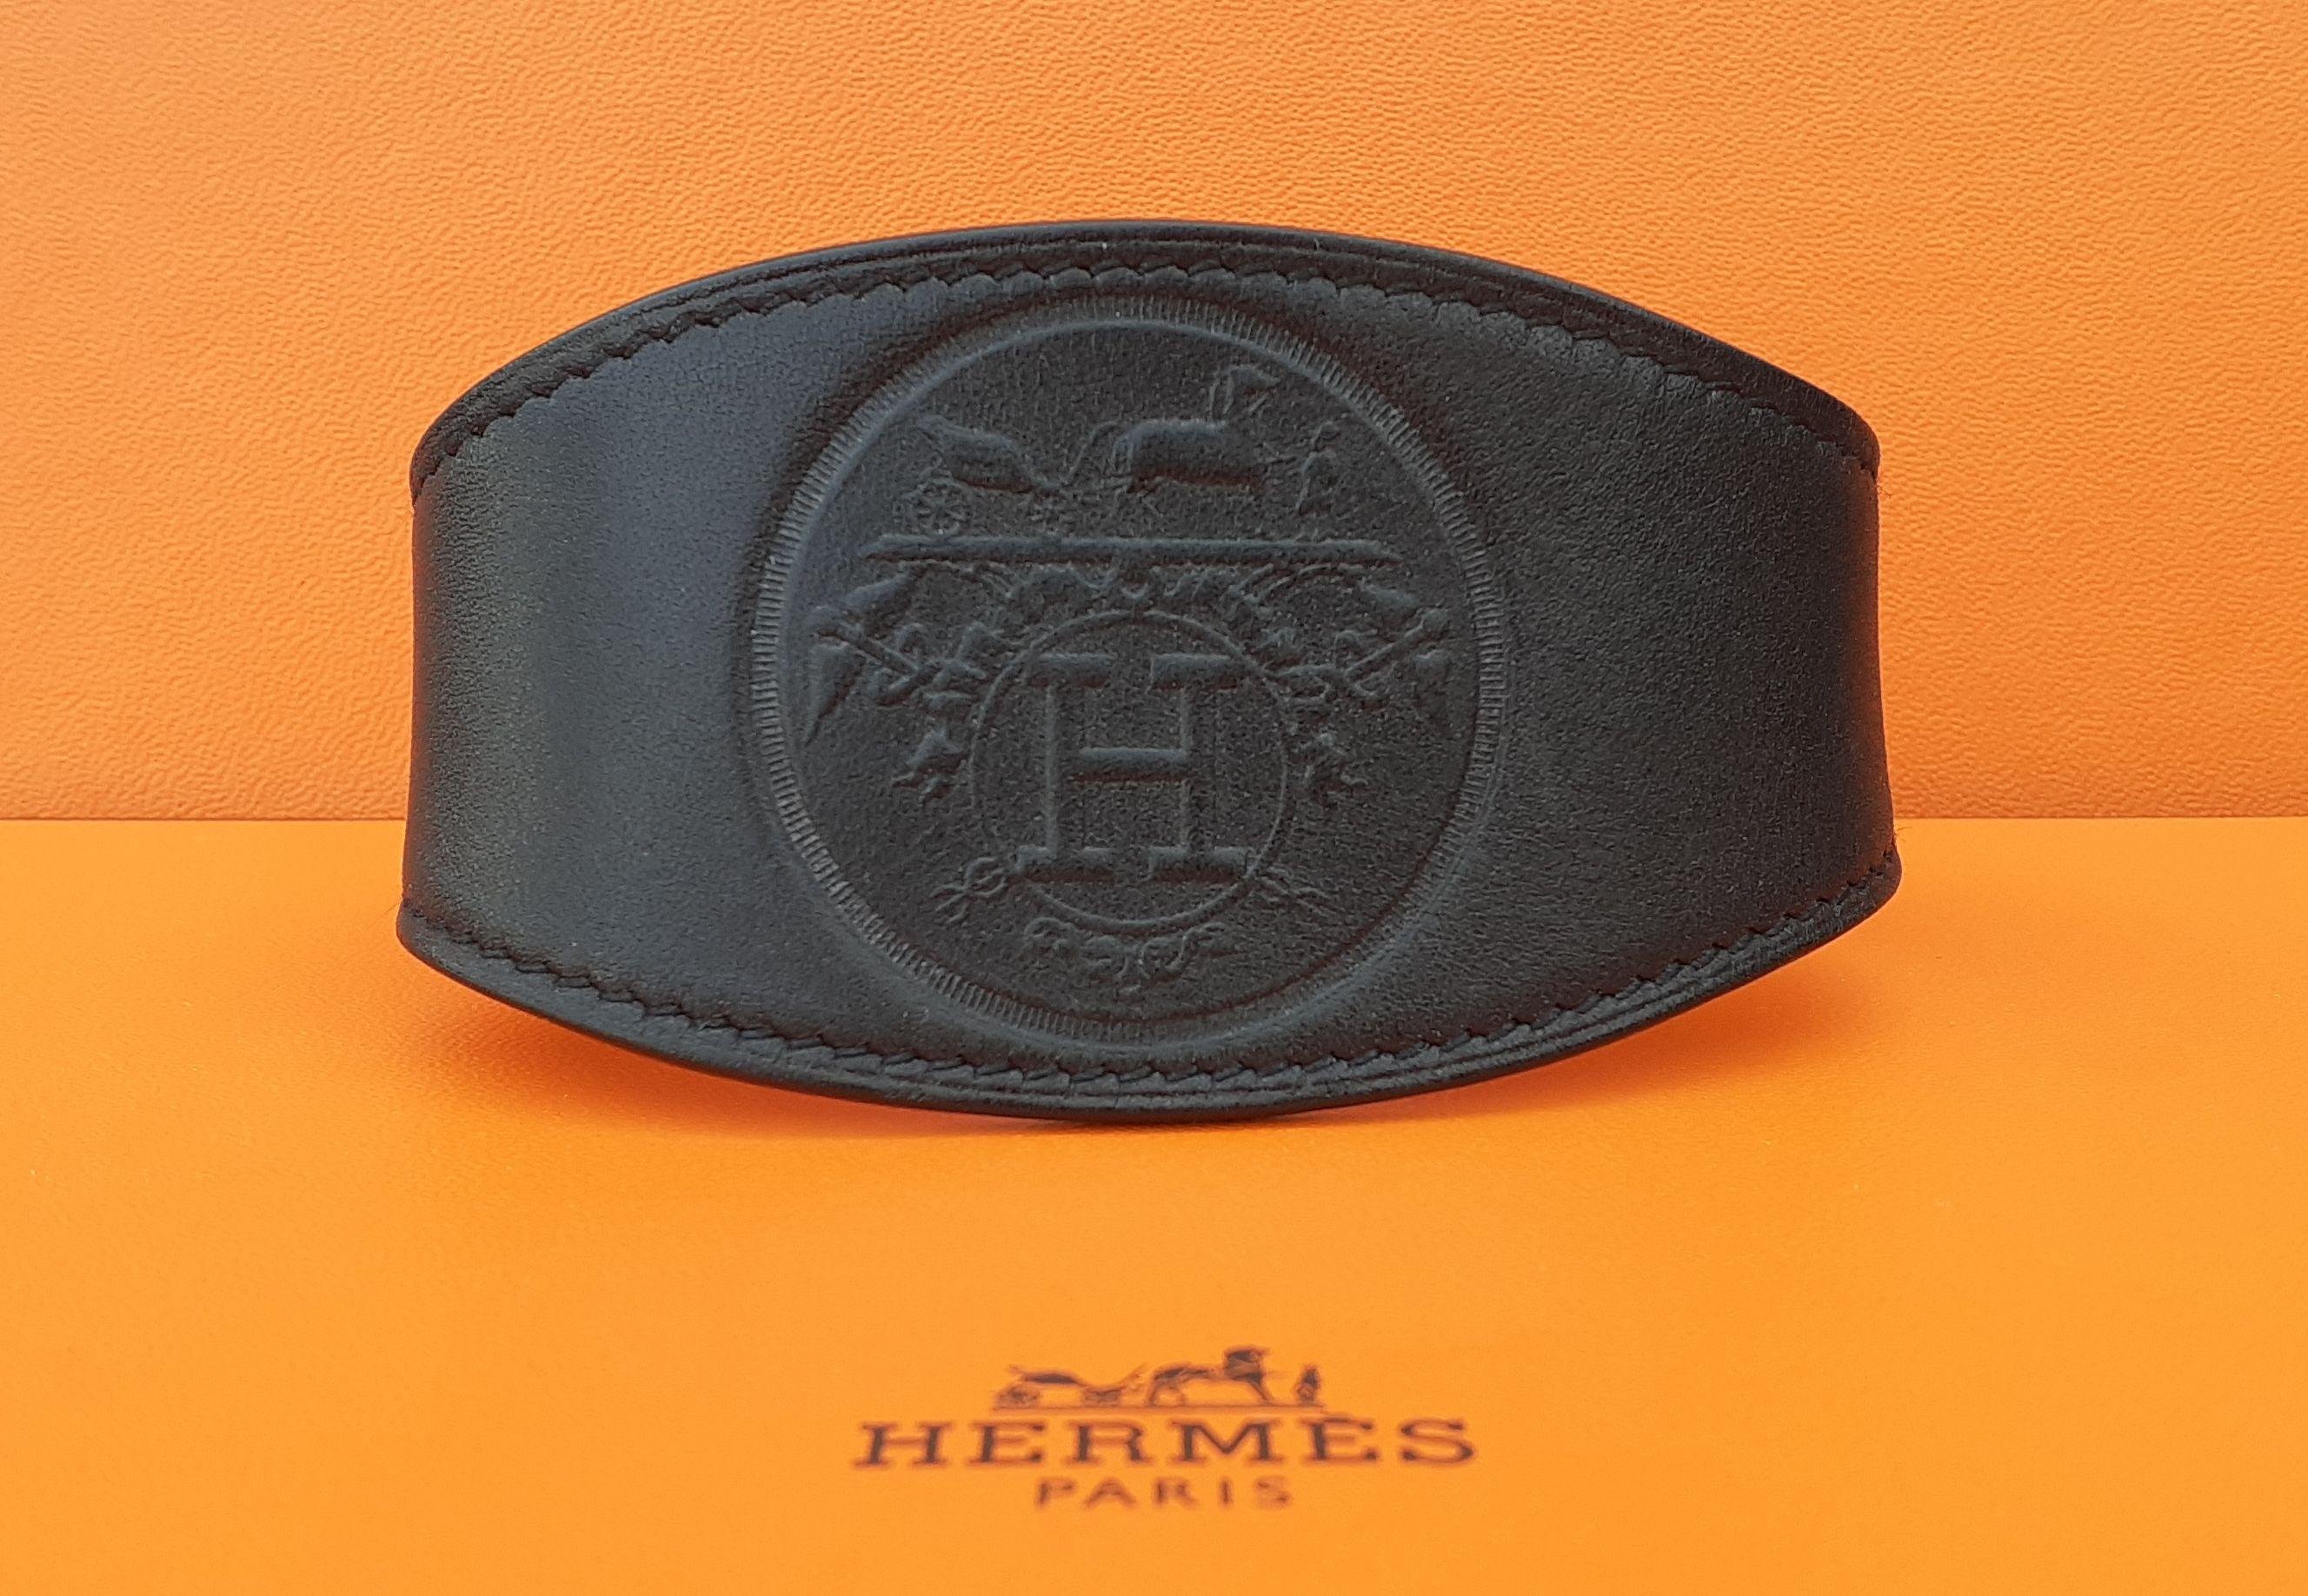 Rare and Beautiful Authentic Hermès Bracelet

For both Man and Woman

Pattern: 